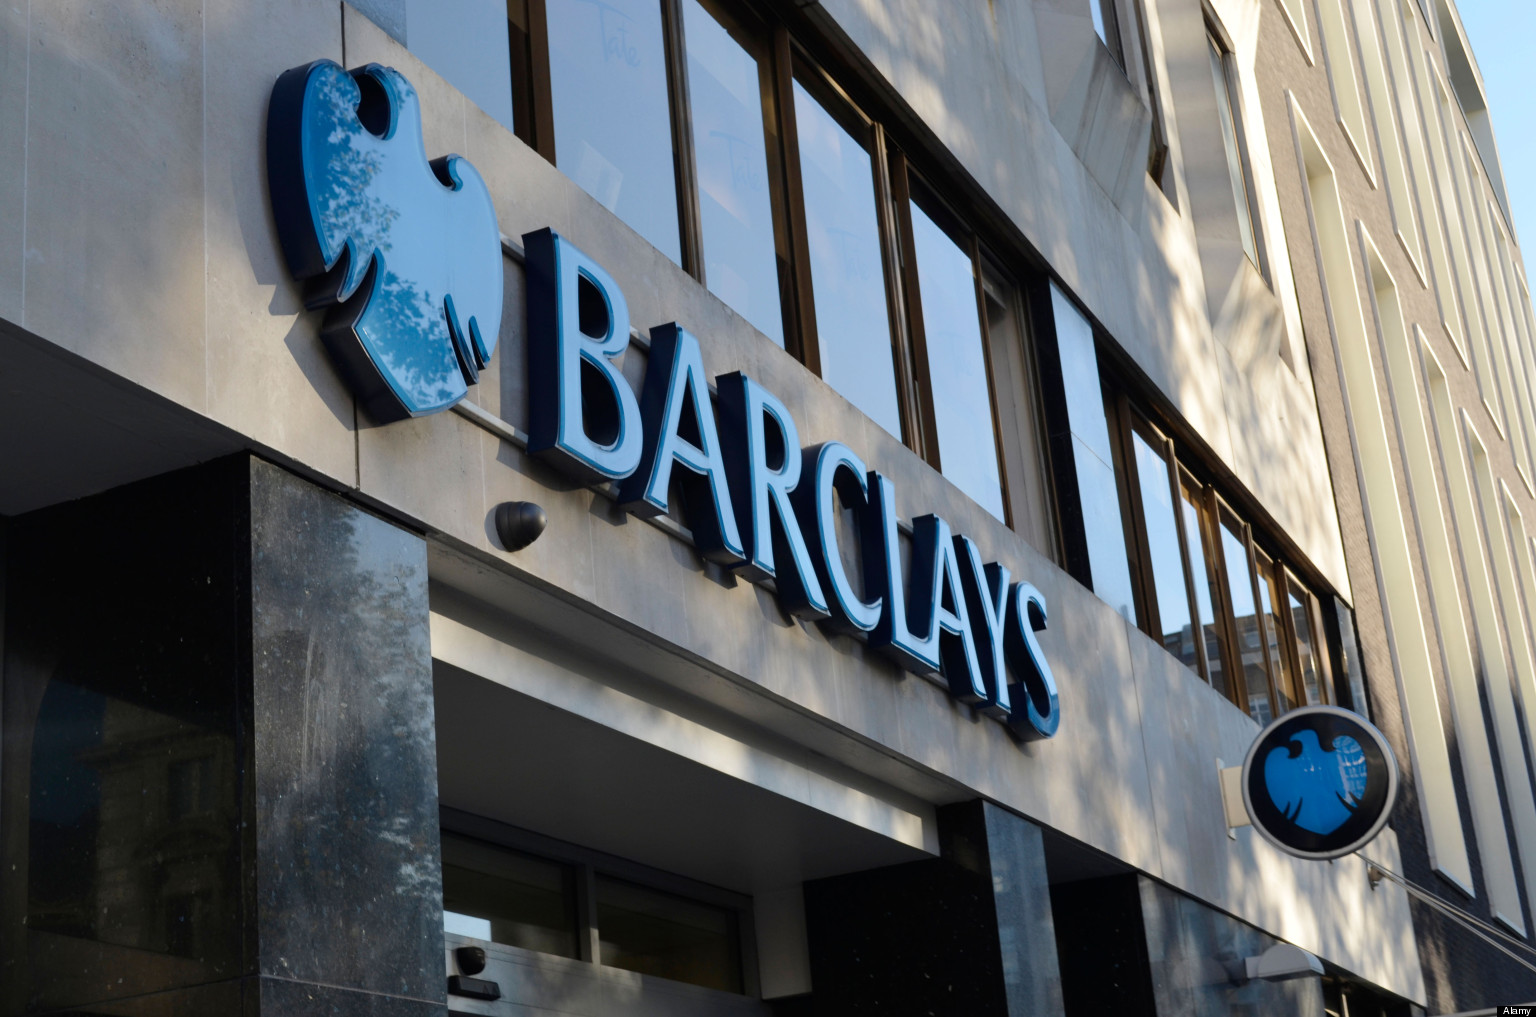 Levine on wall street: Barclays fines and Burger King inversion